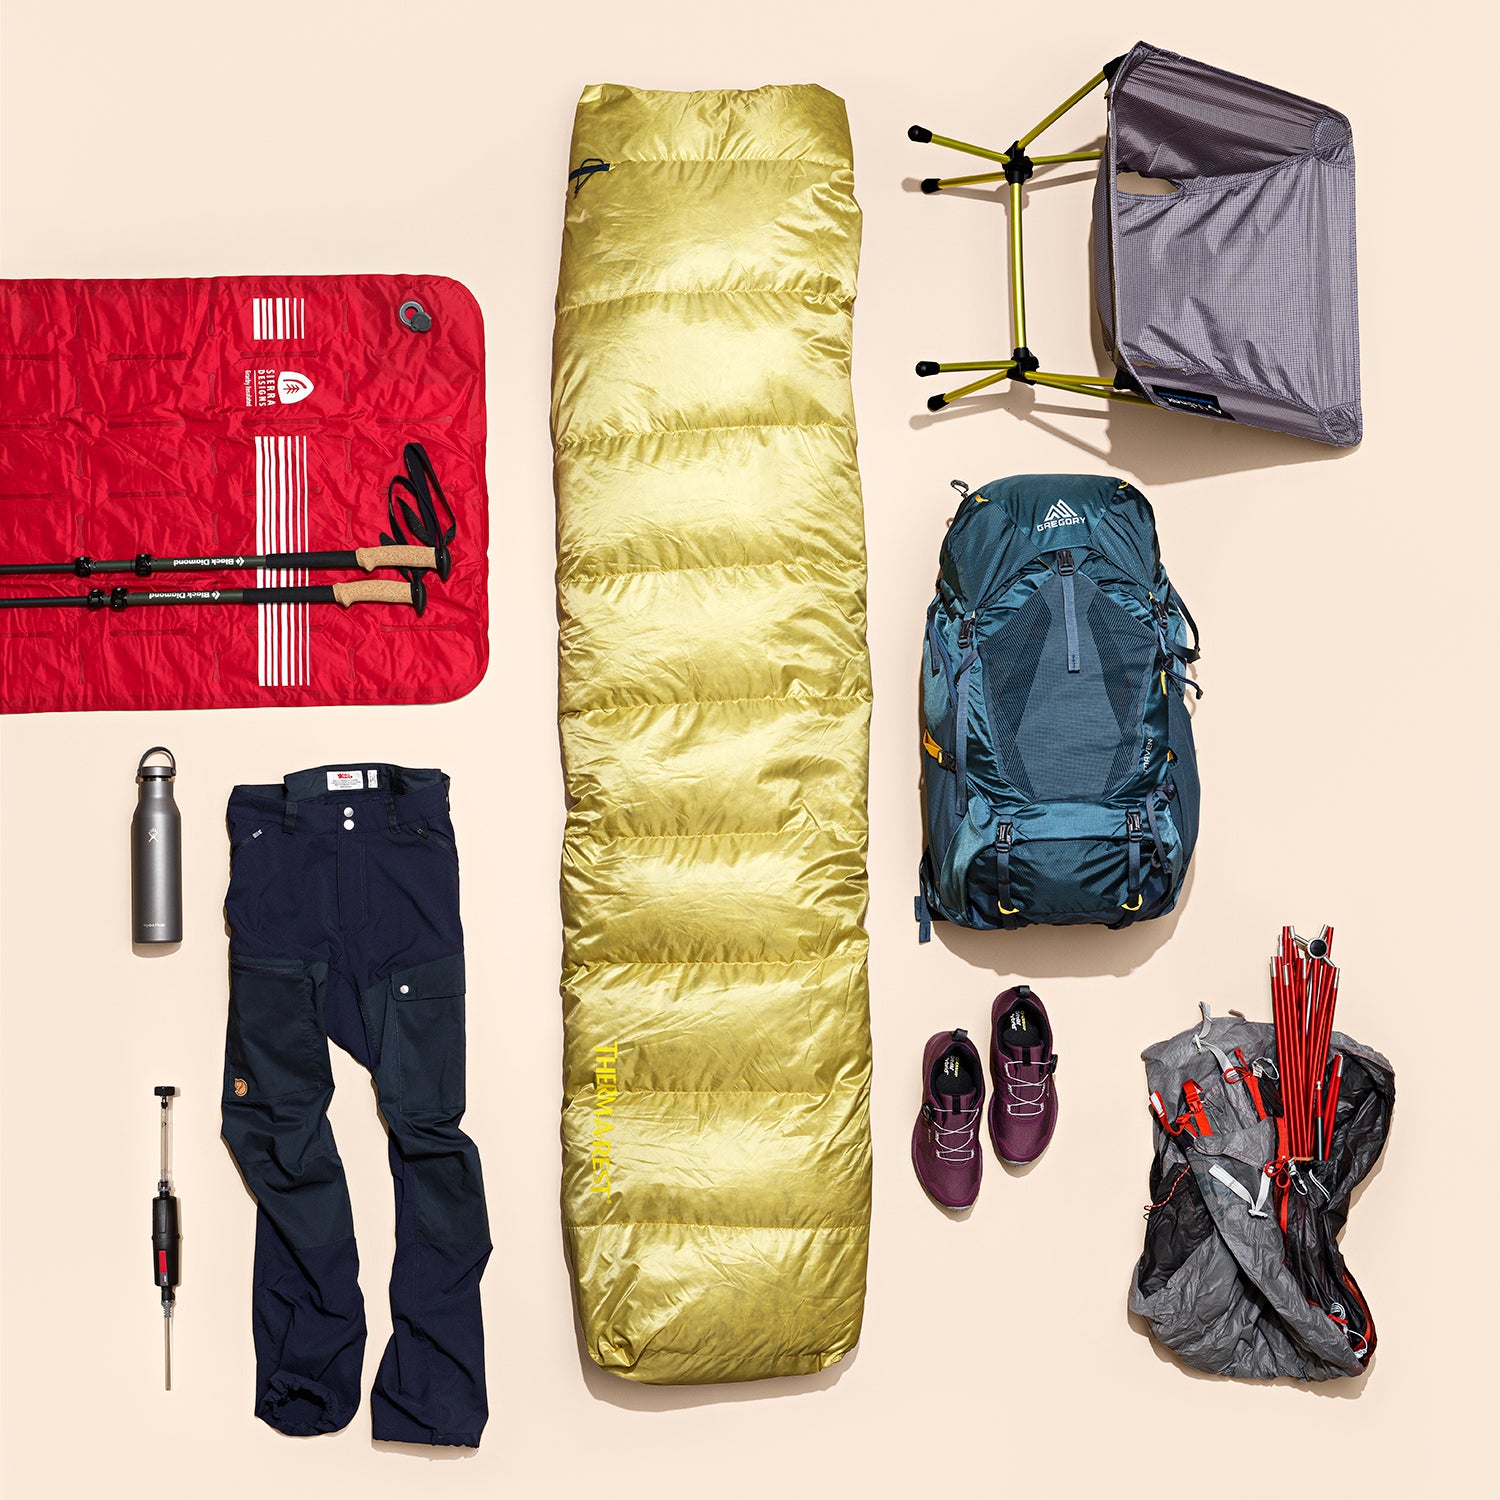 10 Gear Upgrades for Every Kind of Backpacker